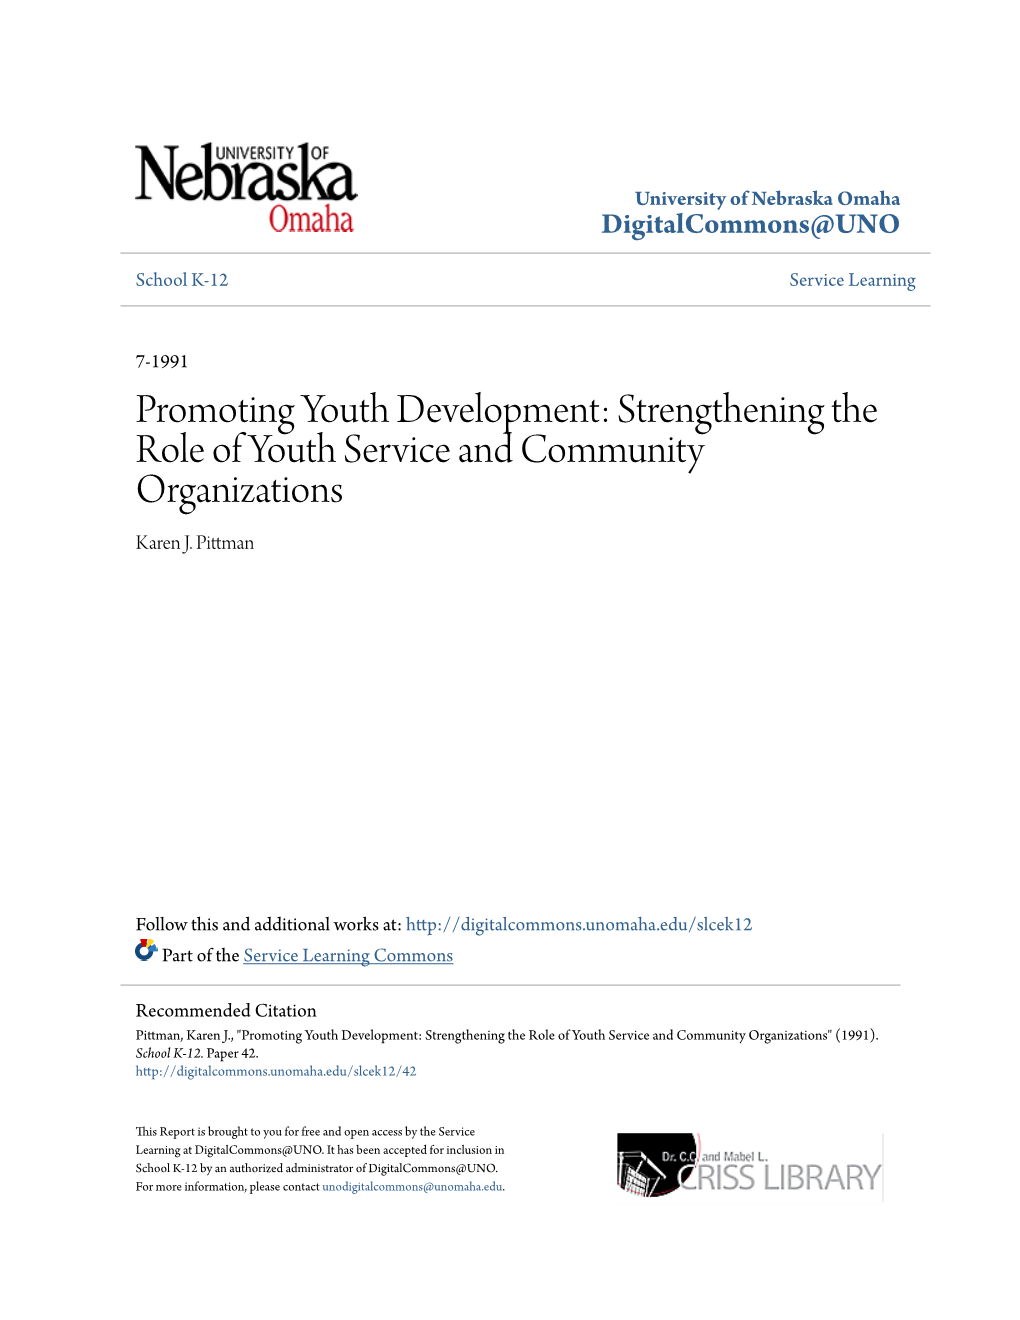 Promoting Youth Development: Strengthening the Role of Youth Service and Community Organizations Karen J